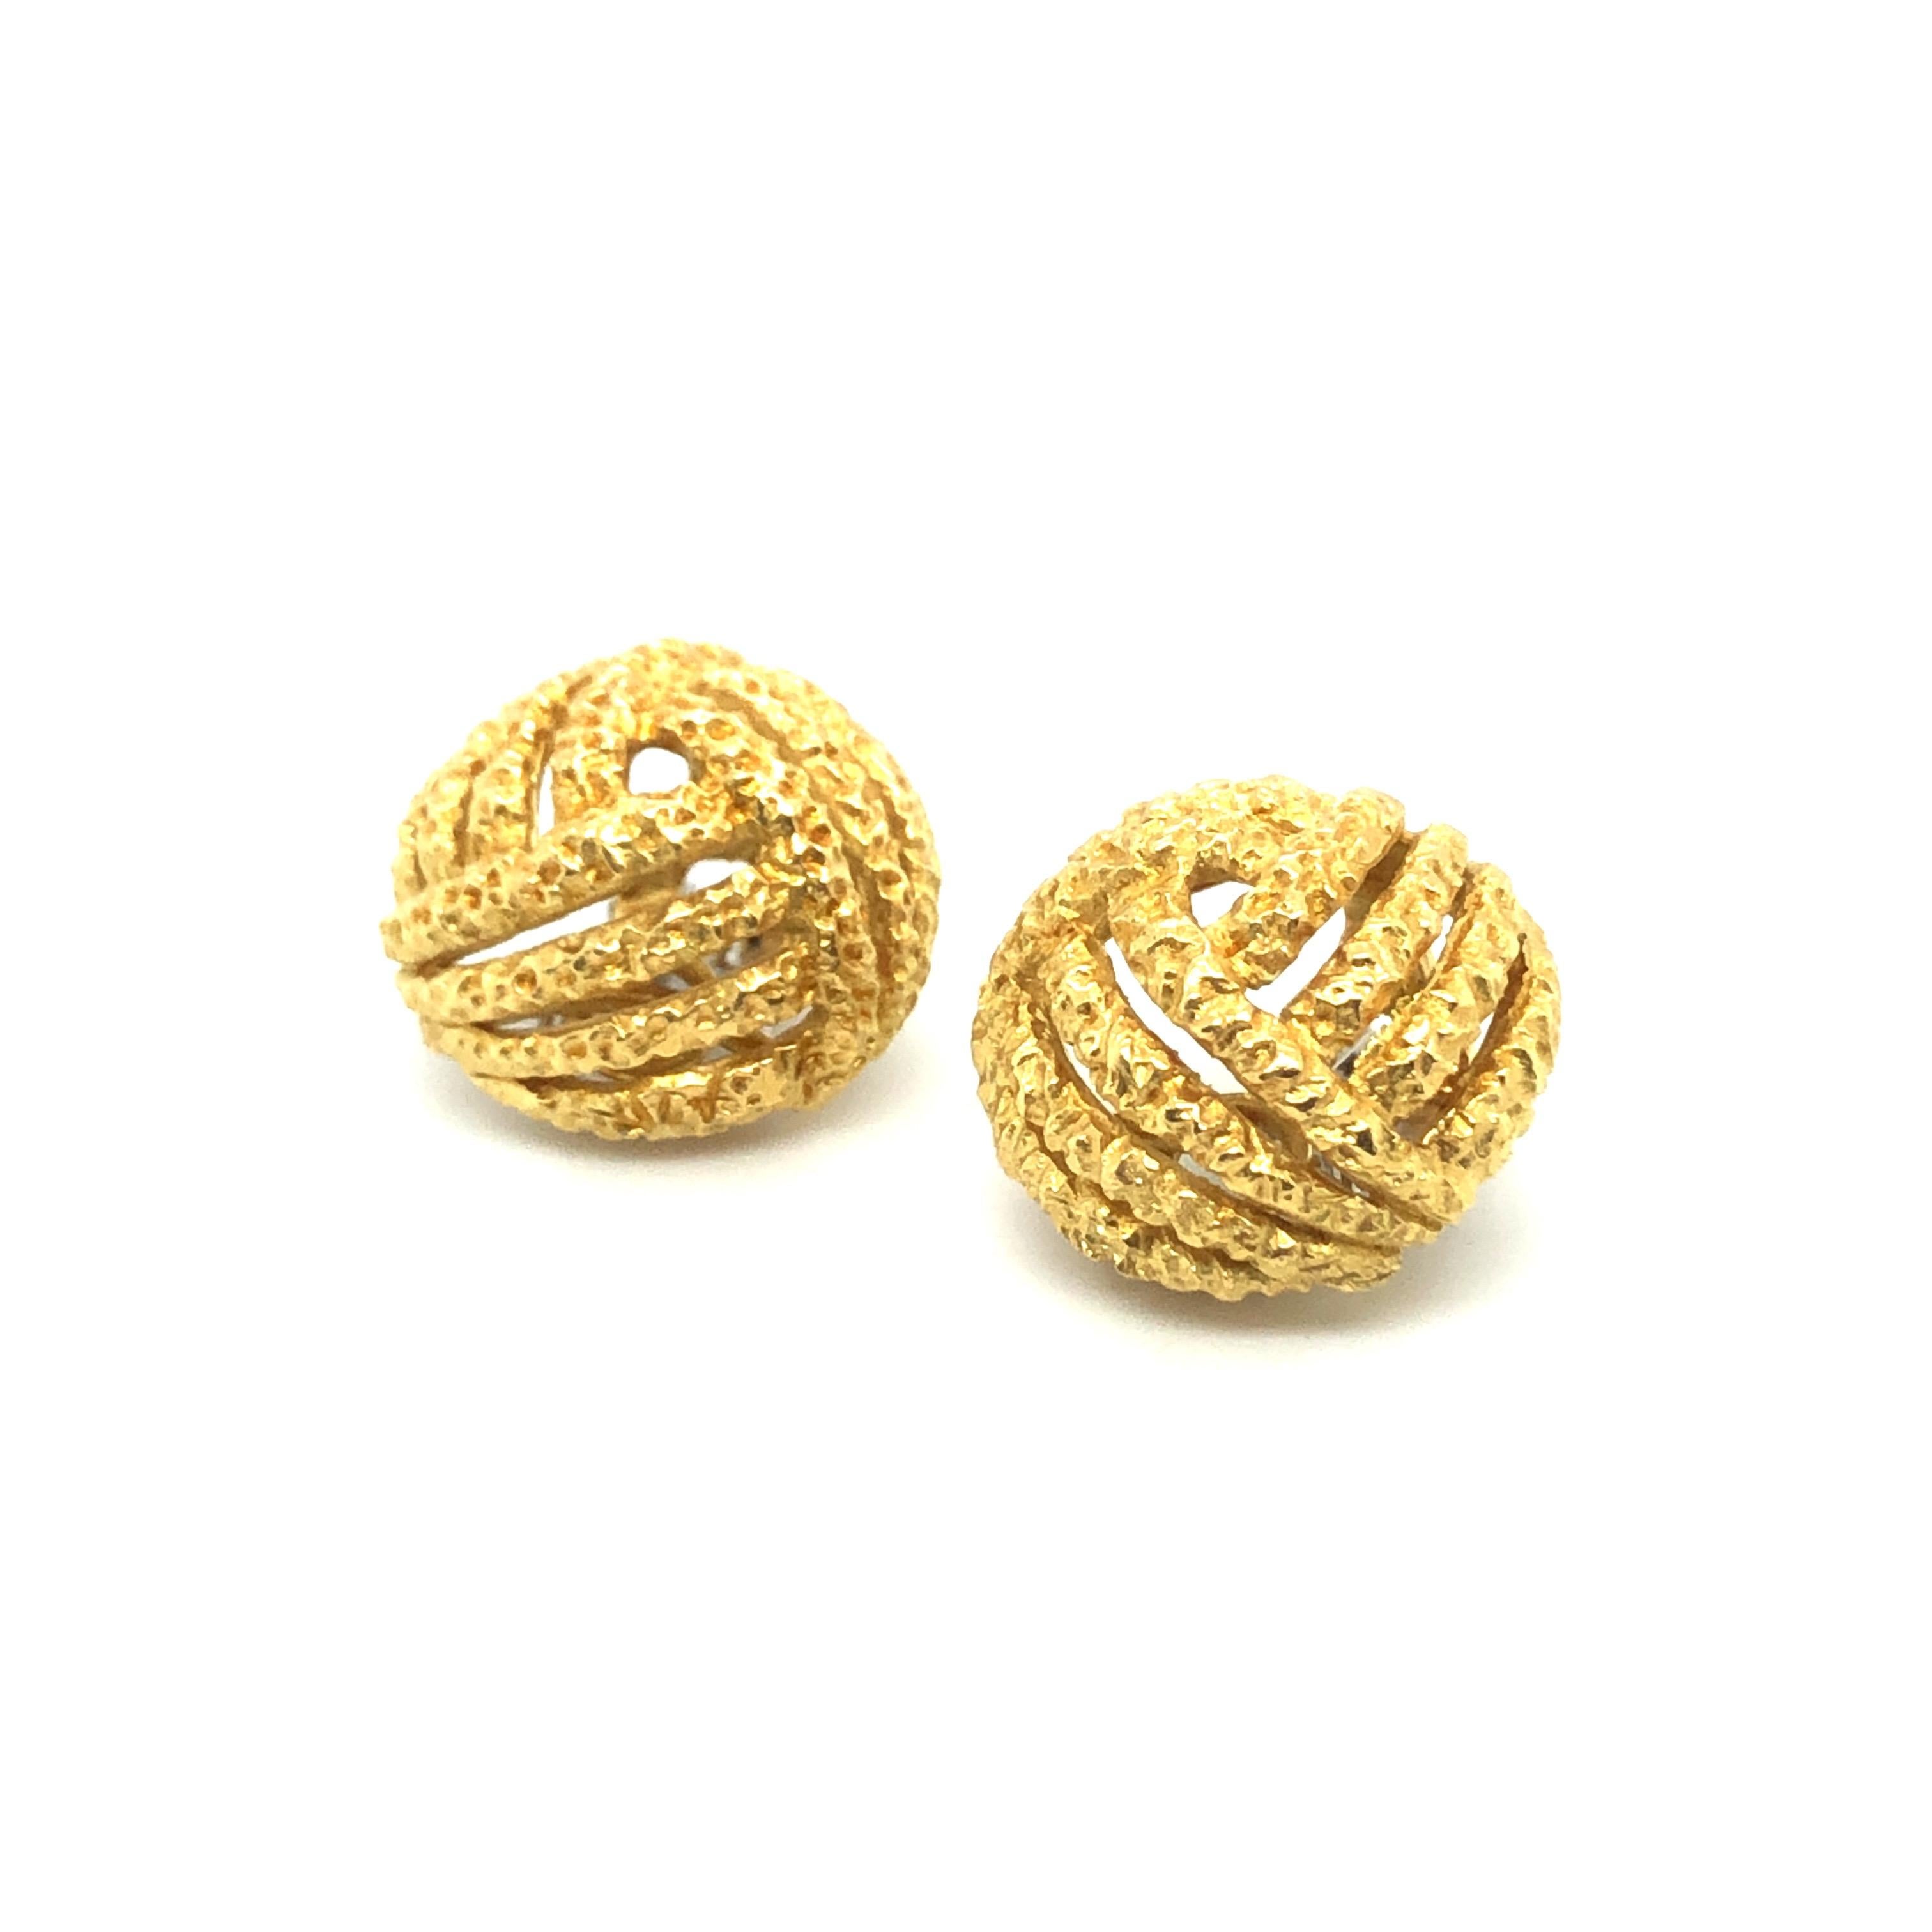 Modern 18 Karat Yellow and White Gold Earclips by Gubelin